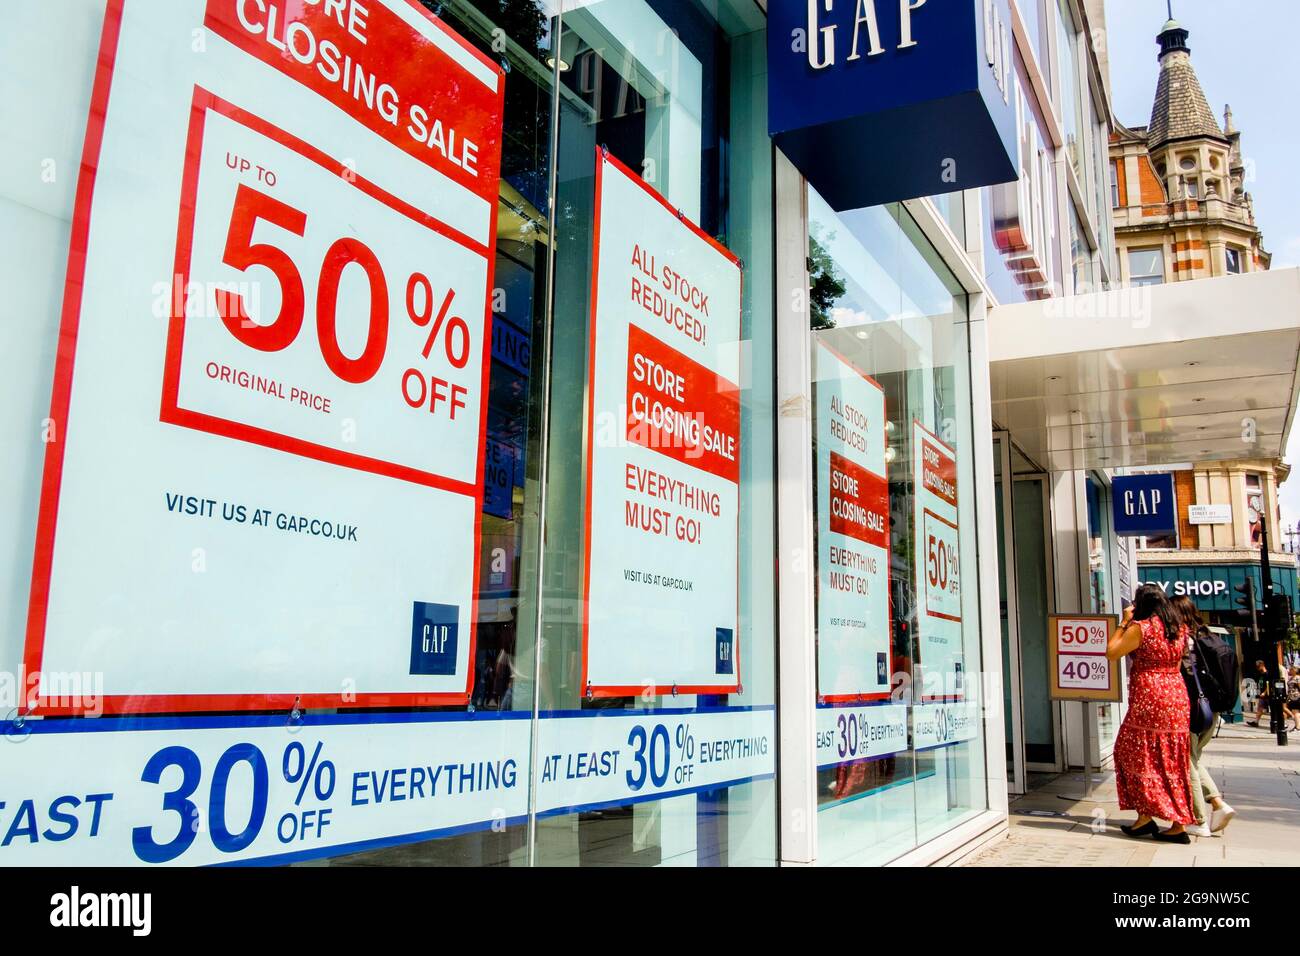 GAP flagship store in Oxford street, London, one of the clothing retailer's 81 stores in the UK that are scheduled for closure in 2021. Stock Photo